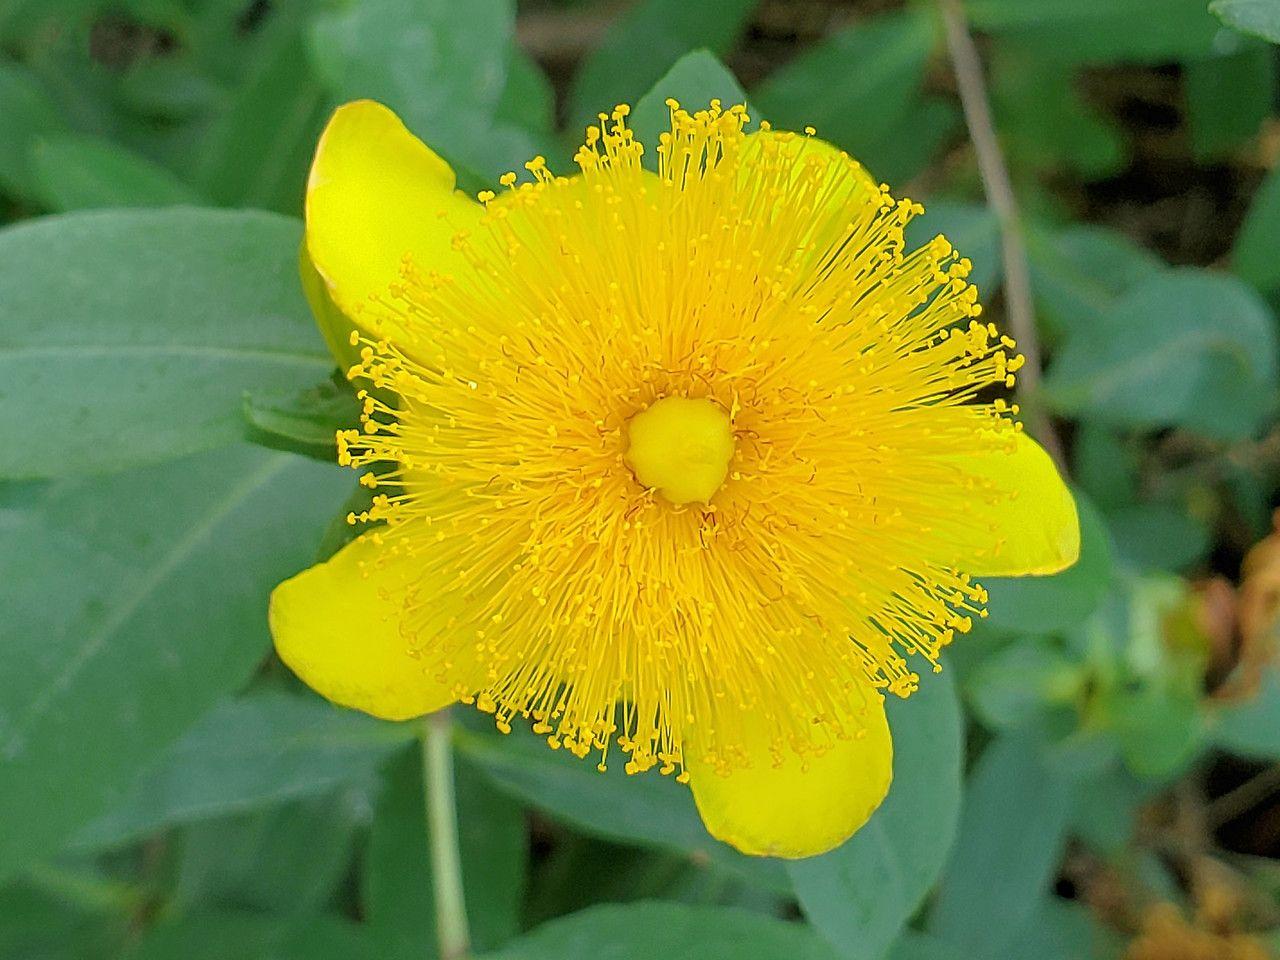 Yellow flower with yellow stamen, yellow stems and green leaves.